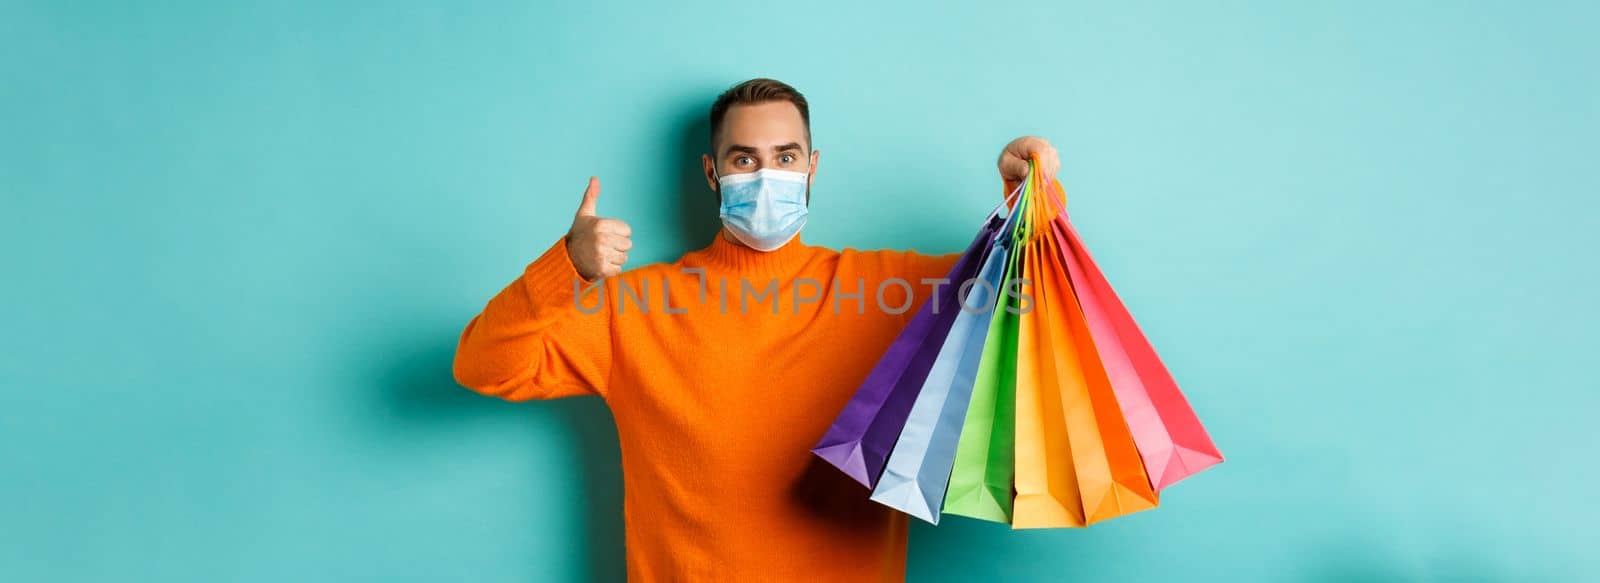 Covid-19, social distancing and lifestyle concept. Young man in face mask showing shopping bags and thumb-up, buying holiday gifts during pandemic.